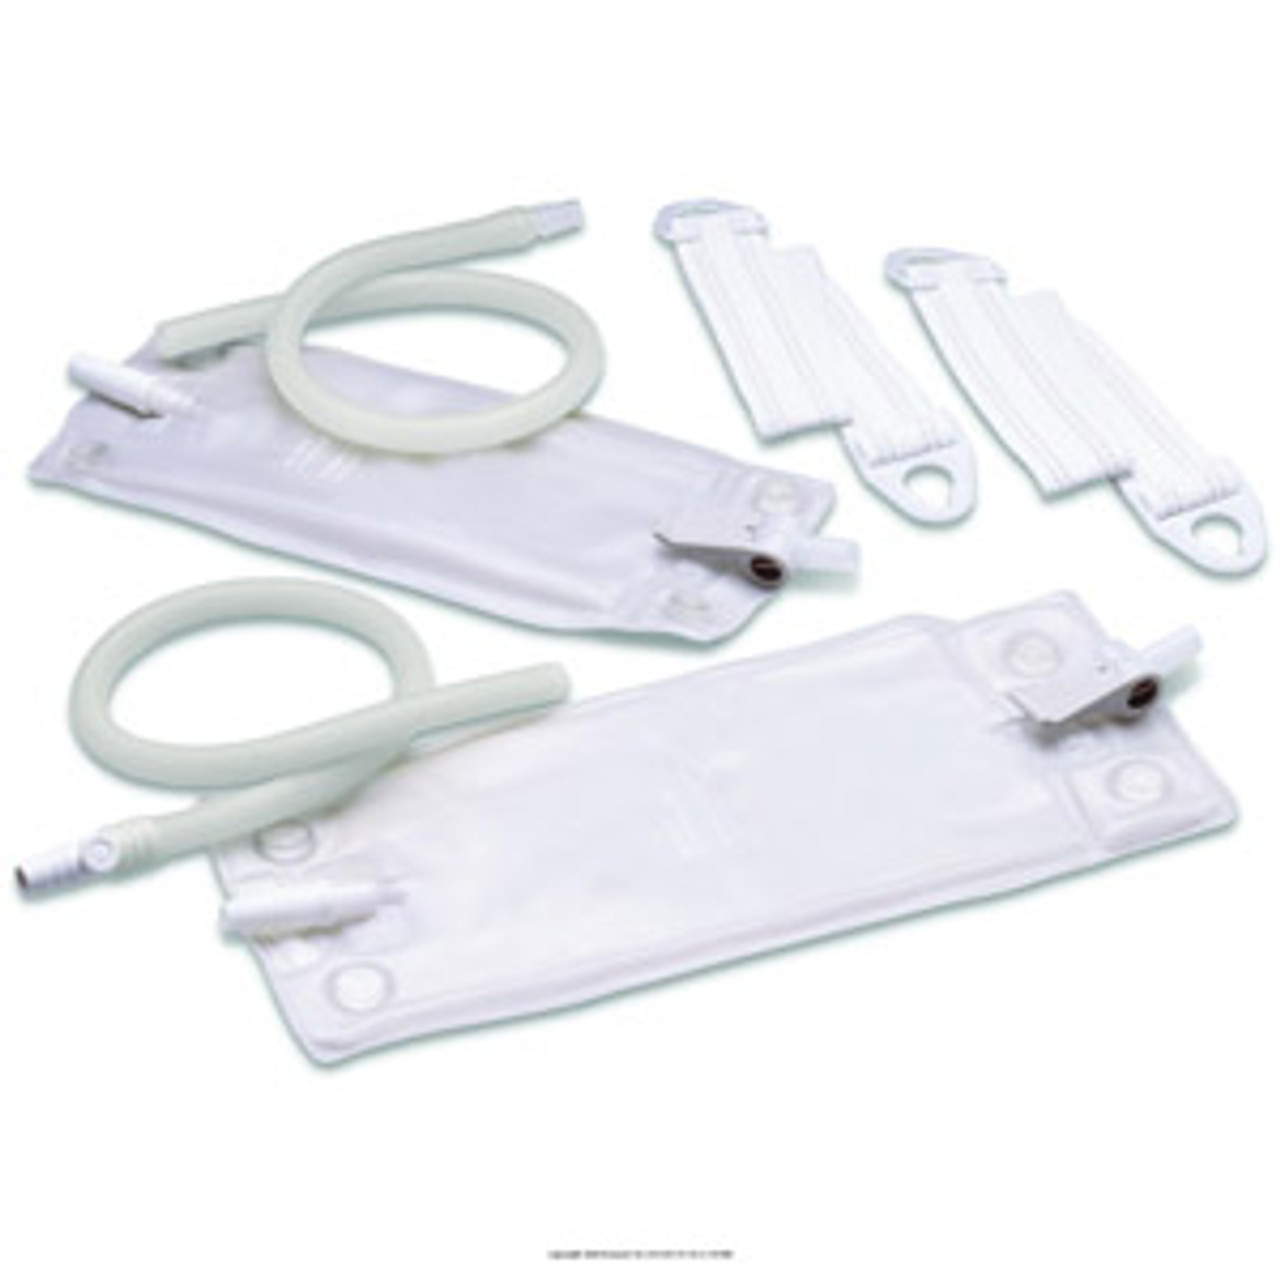 Vented Latex-Free Urinary Leg Bag Combination Pack HOL9645BX